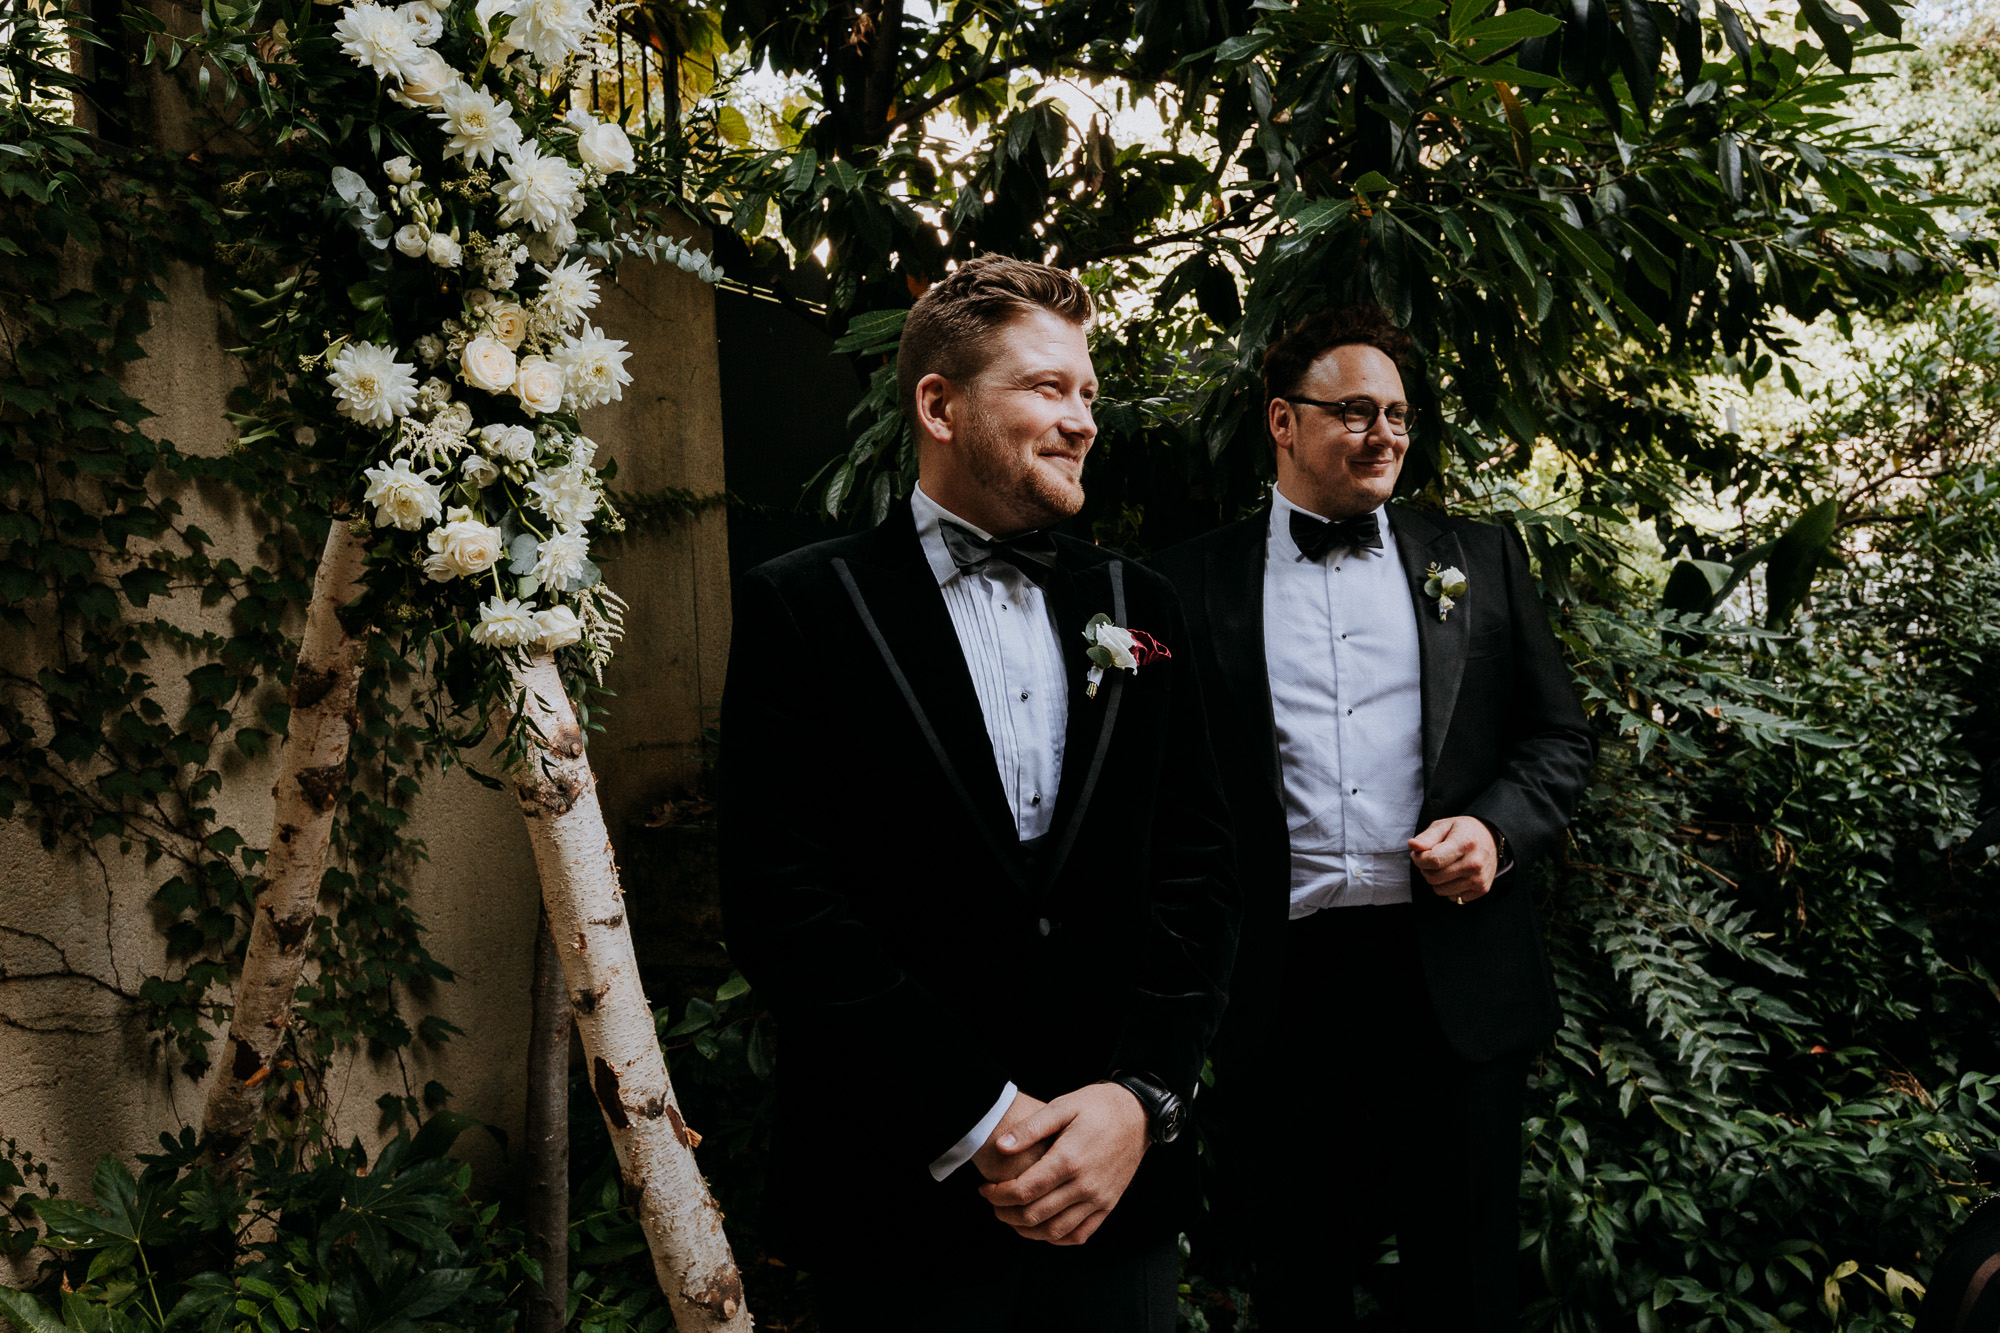 Paris wedding photographer: Portrait of the groom showing emotion as he watches his bride walk up the aisle - in the background his best man seem almost as overwhelmed as him.